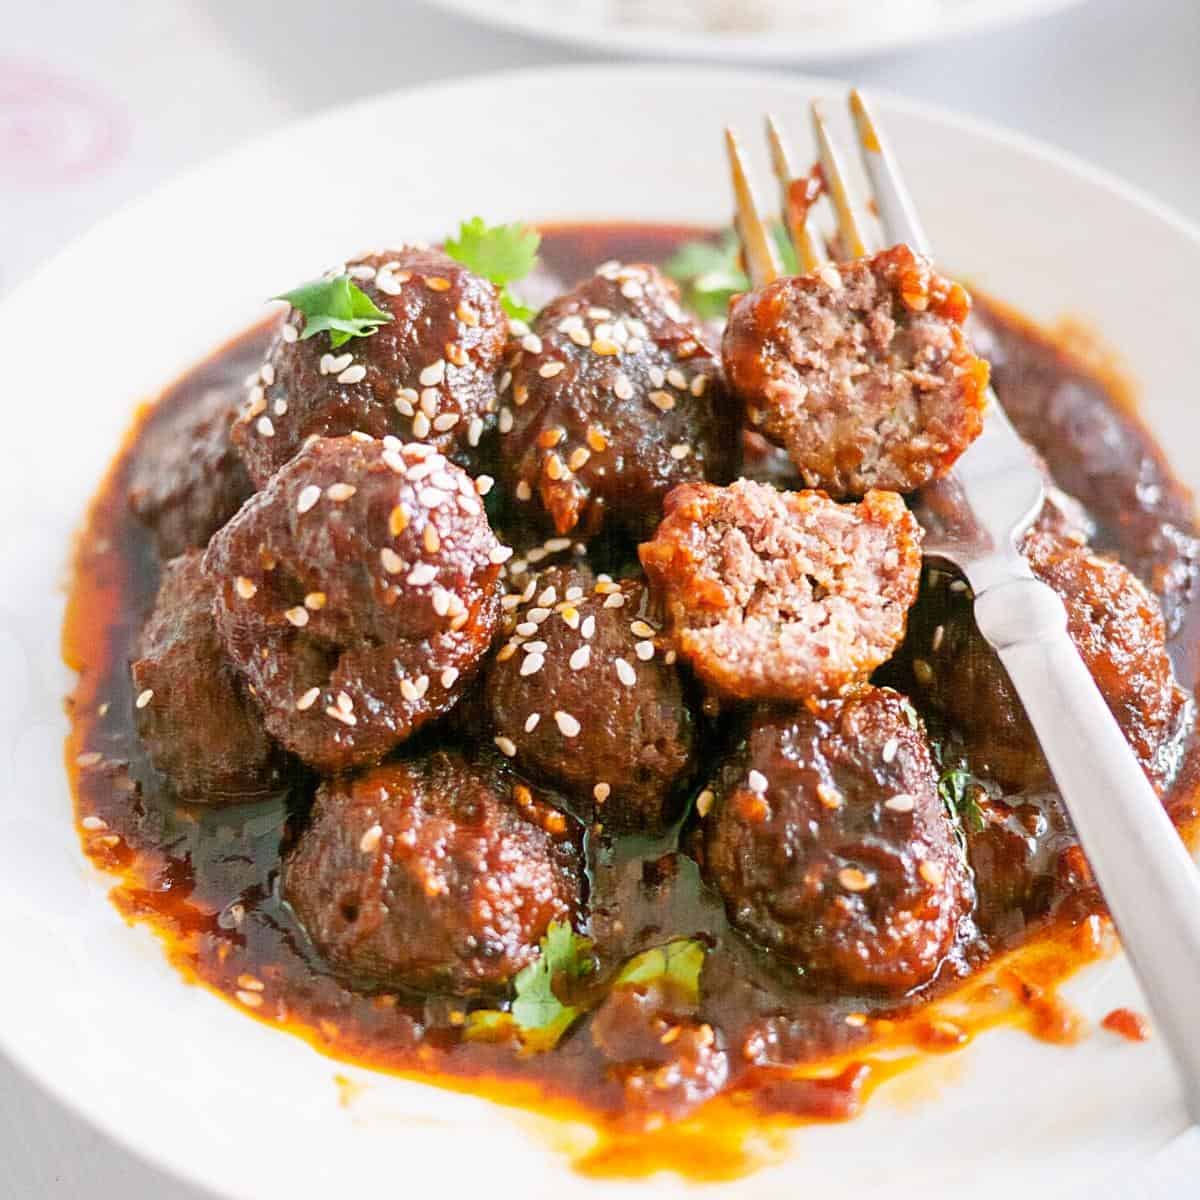 A shallow plate with meatballs and a fork.